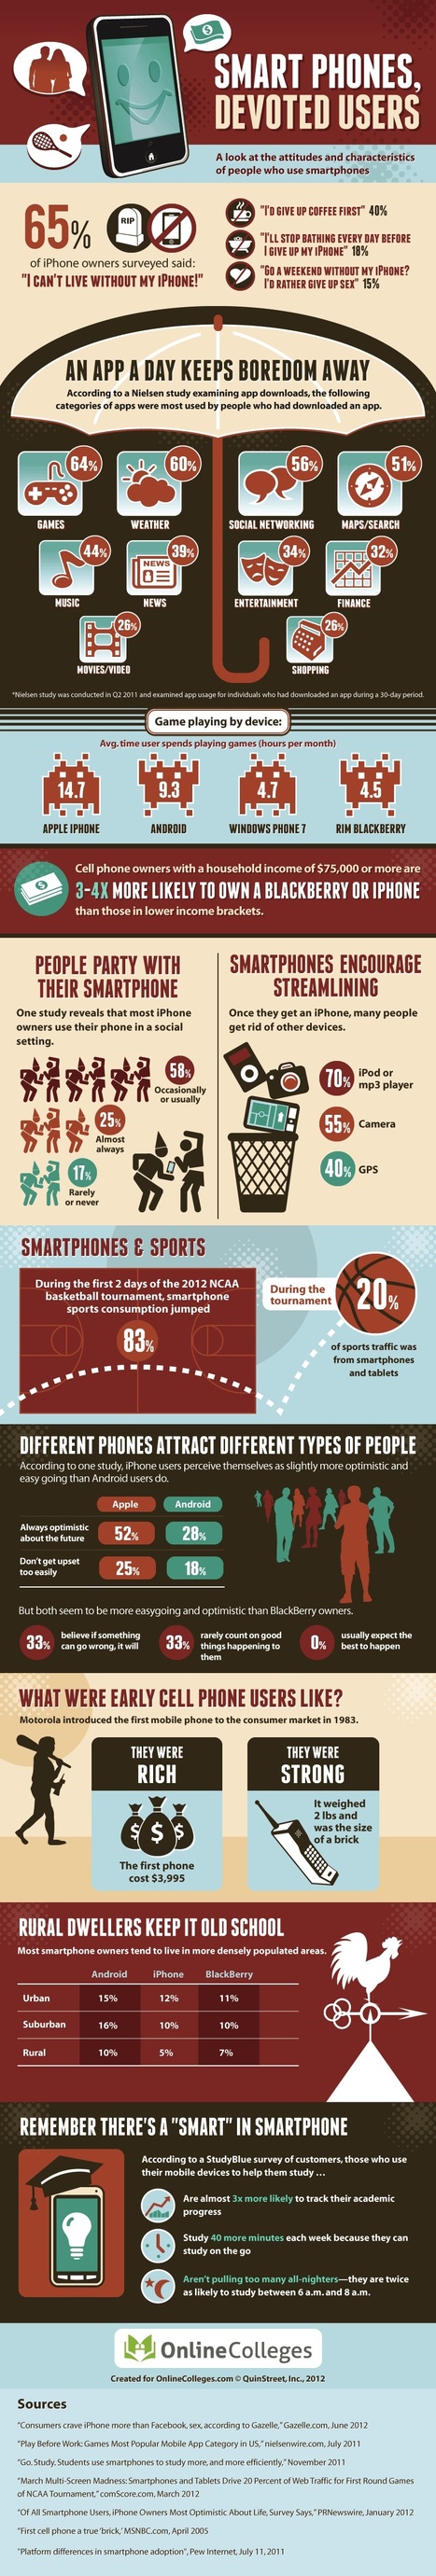 Are You Addicted to Your Smartphone? [INFOGRAPHIC] | Latest Social Media News | Scoop.it